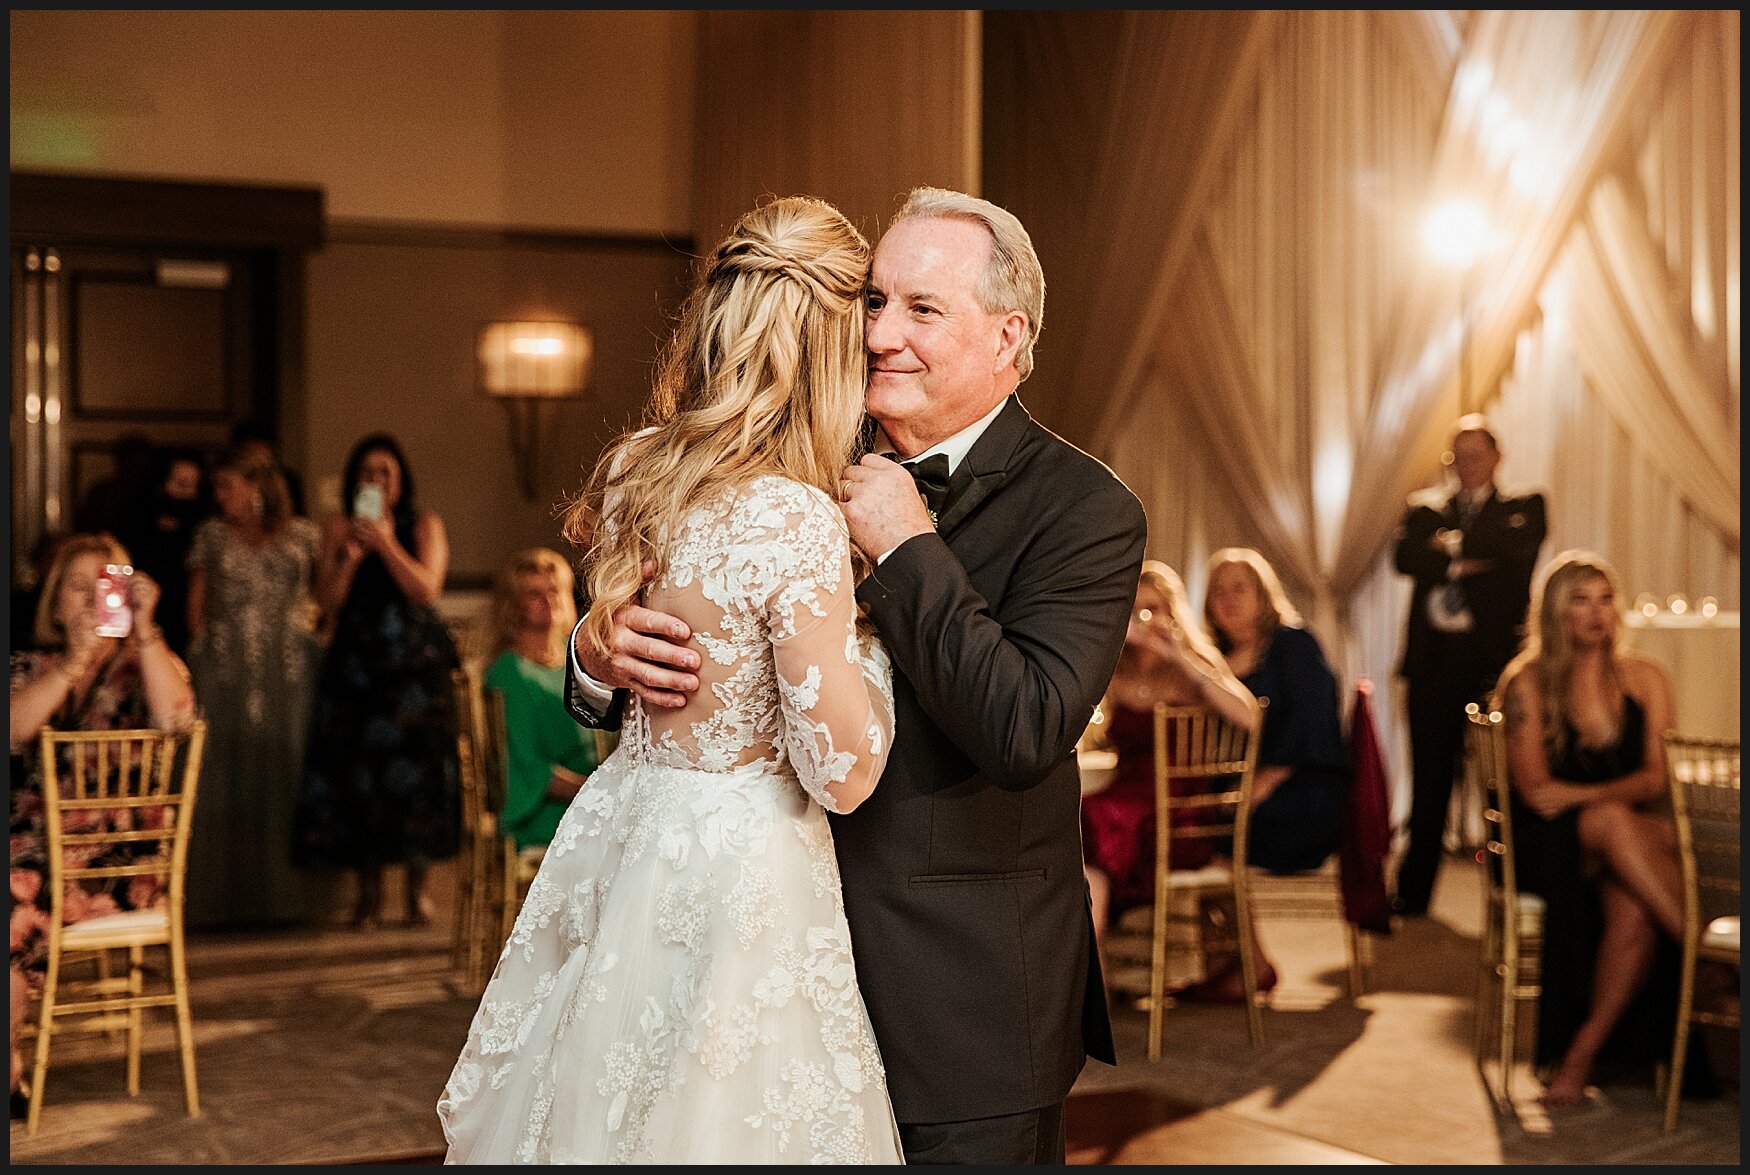 father-daughter-wedding-dance